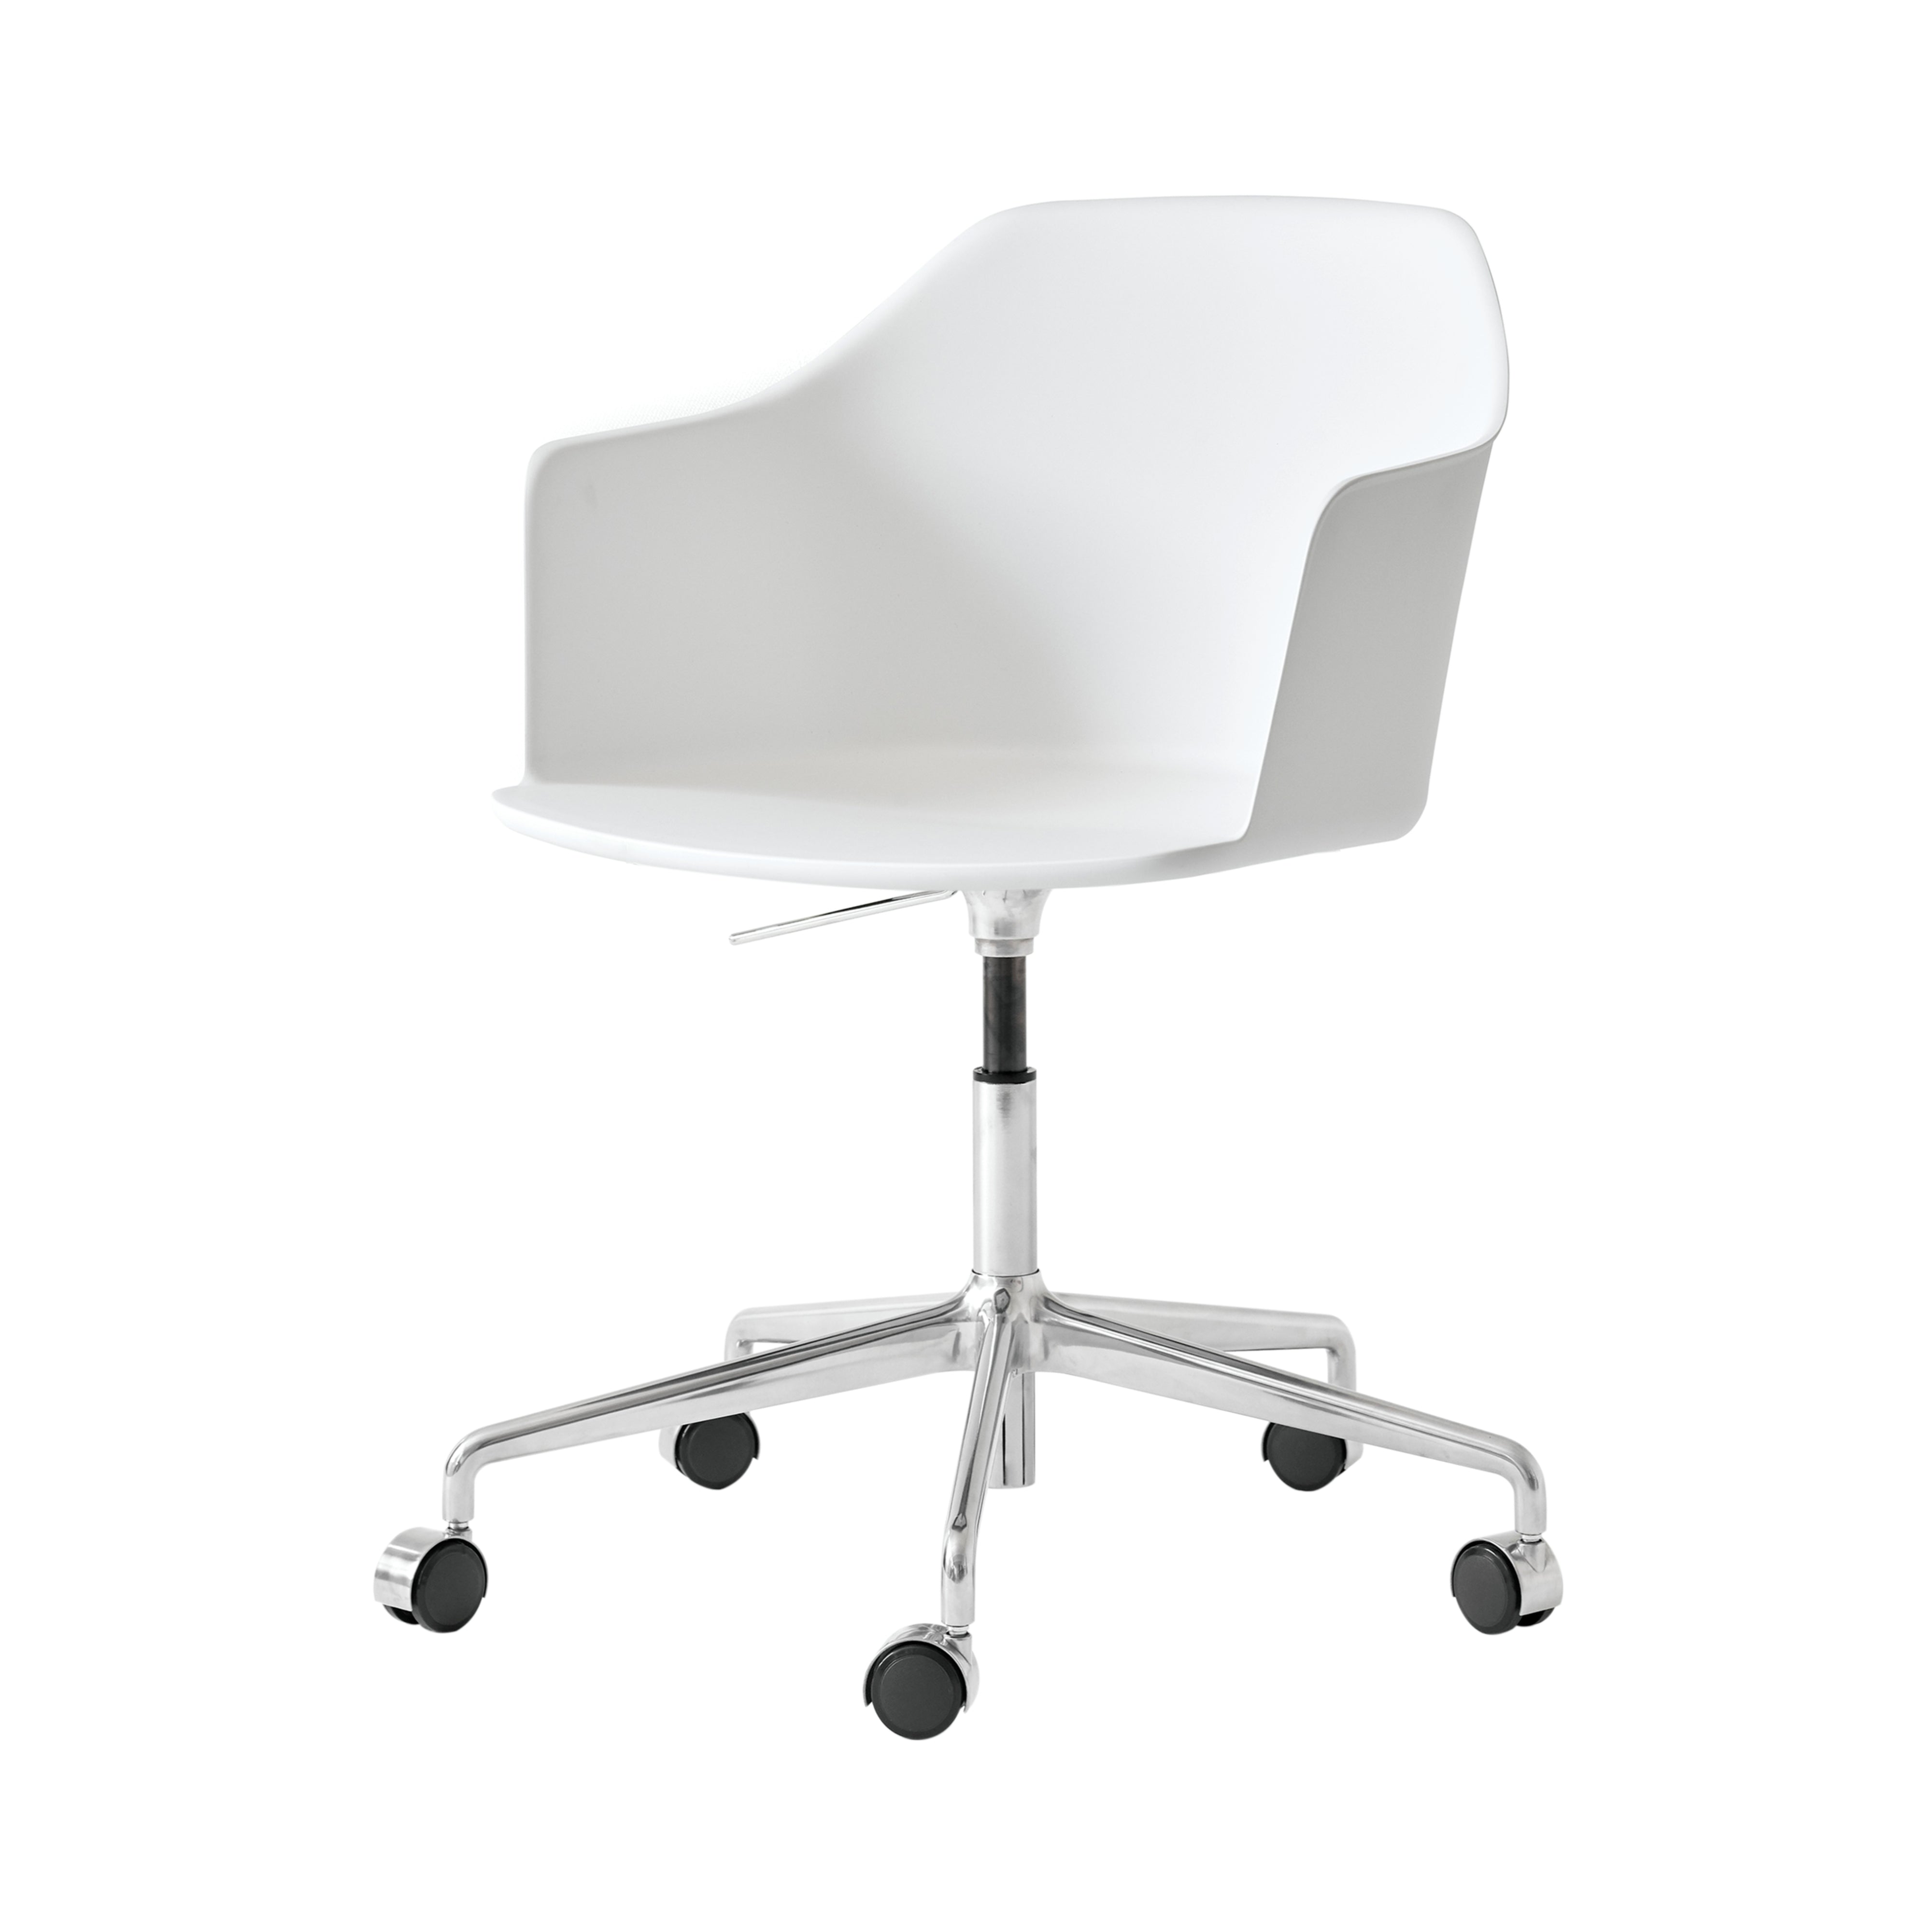 Rely Chair HW53: White + Polished Aluminum